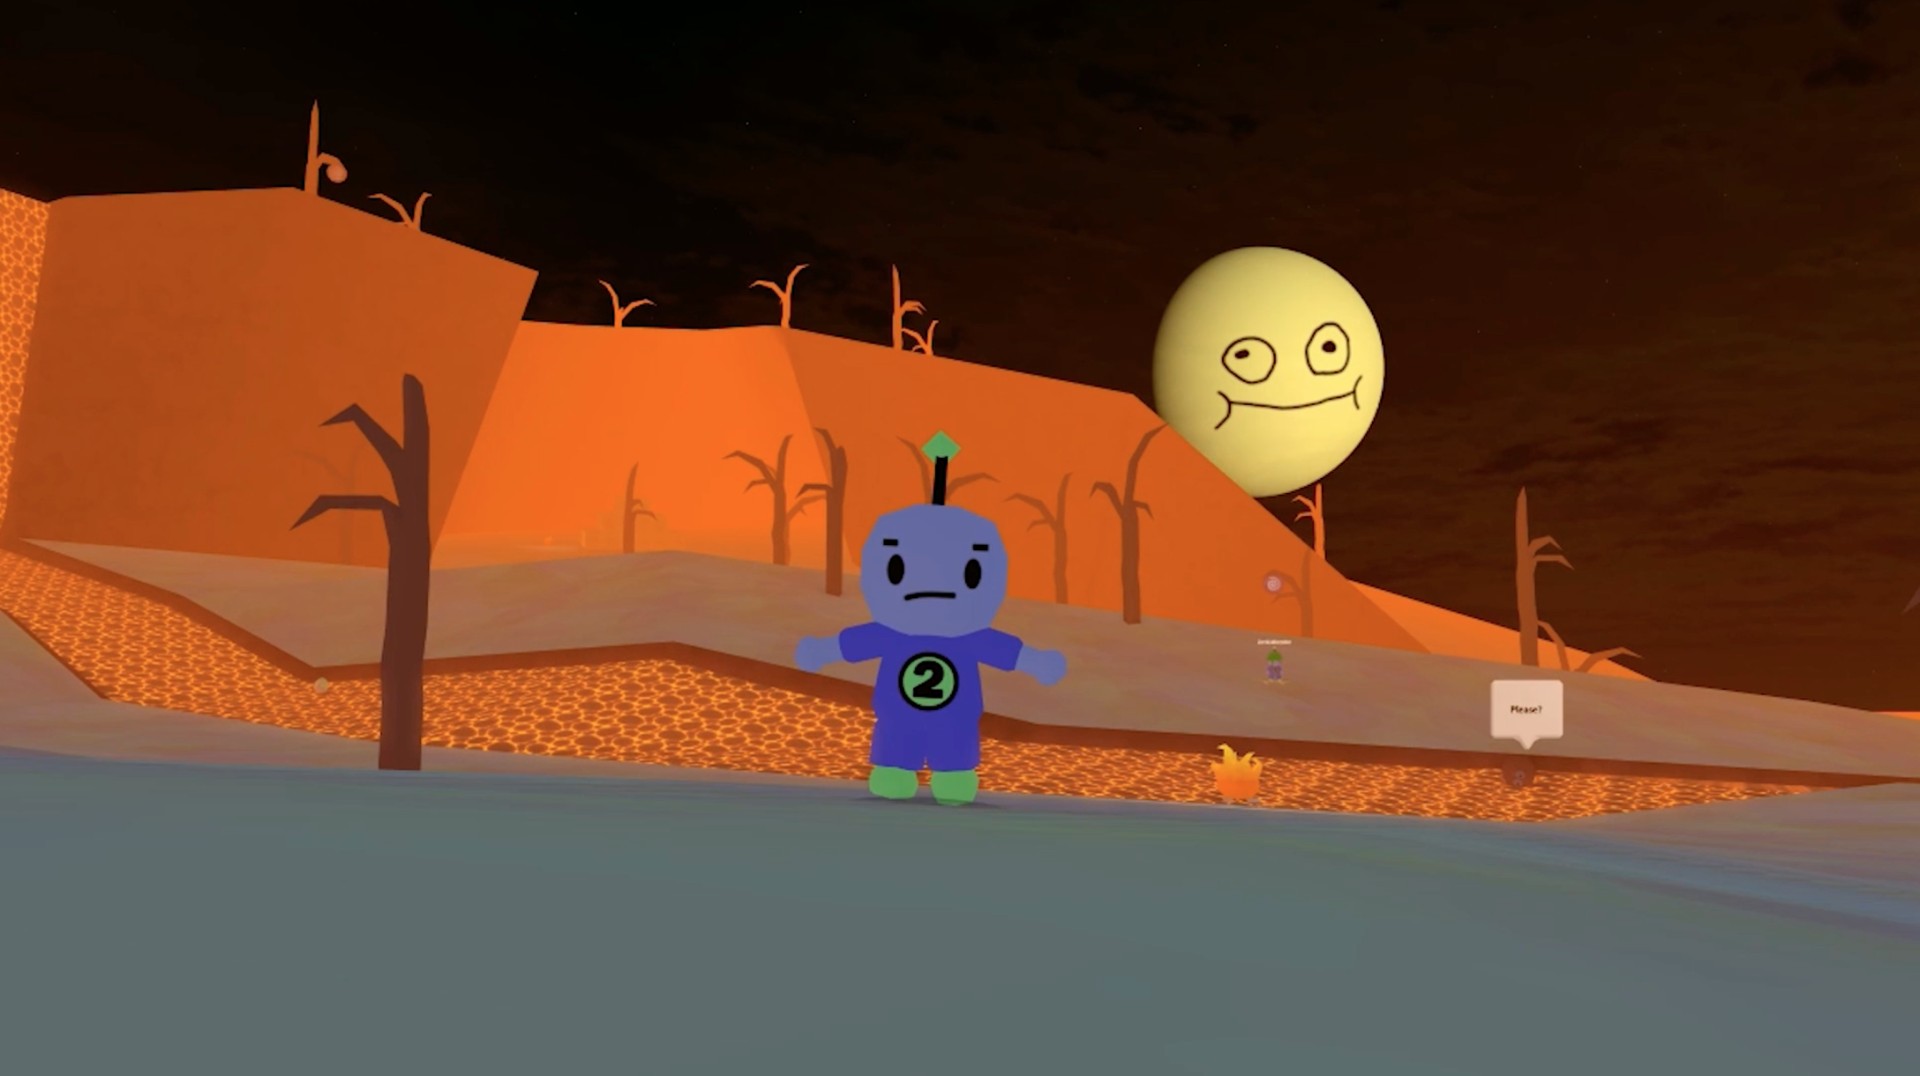 3d Platformer Robot 64 Is Now Available On Roblox For Xbox One Xbox Wire - roblox roboticly